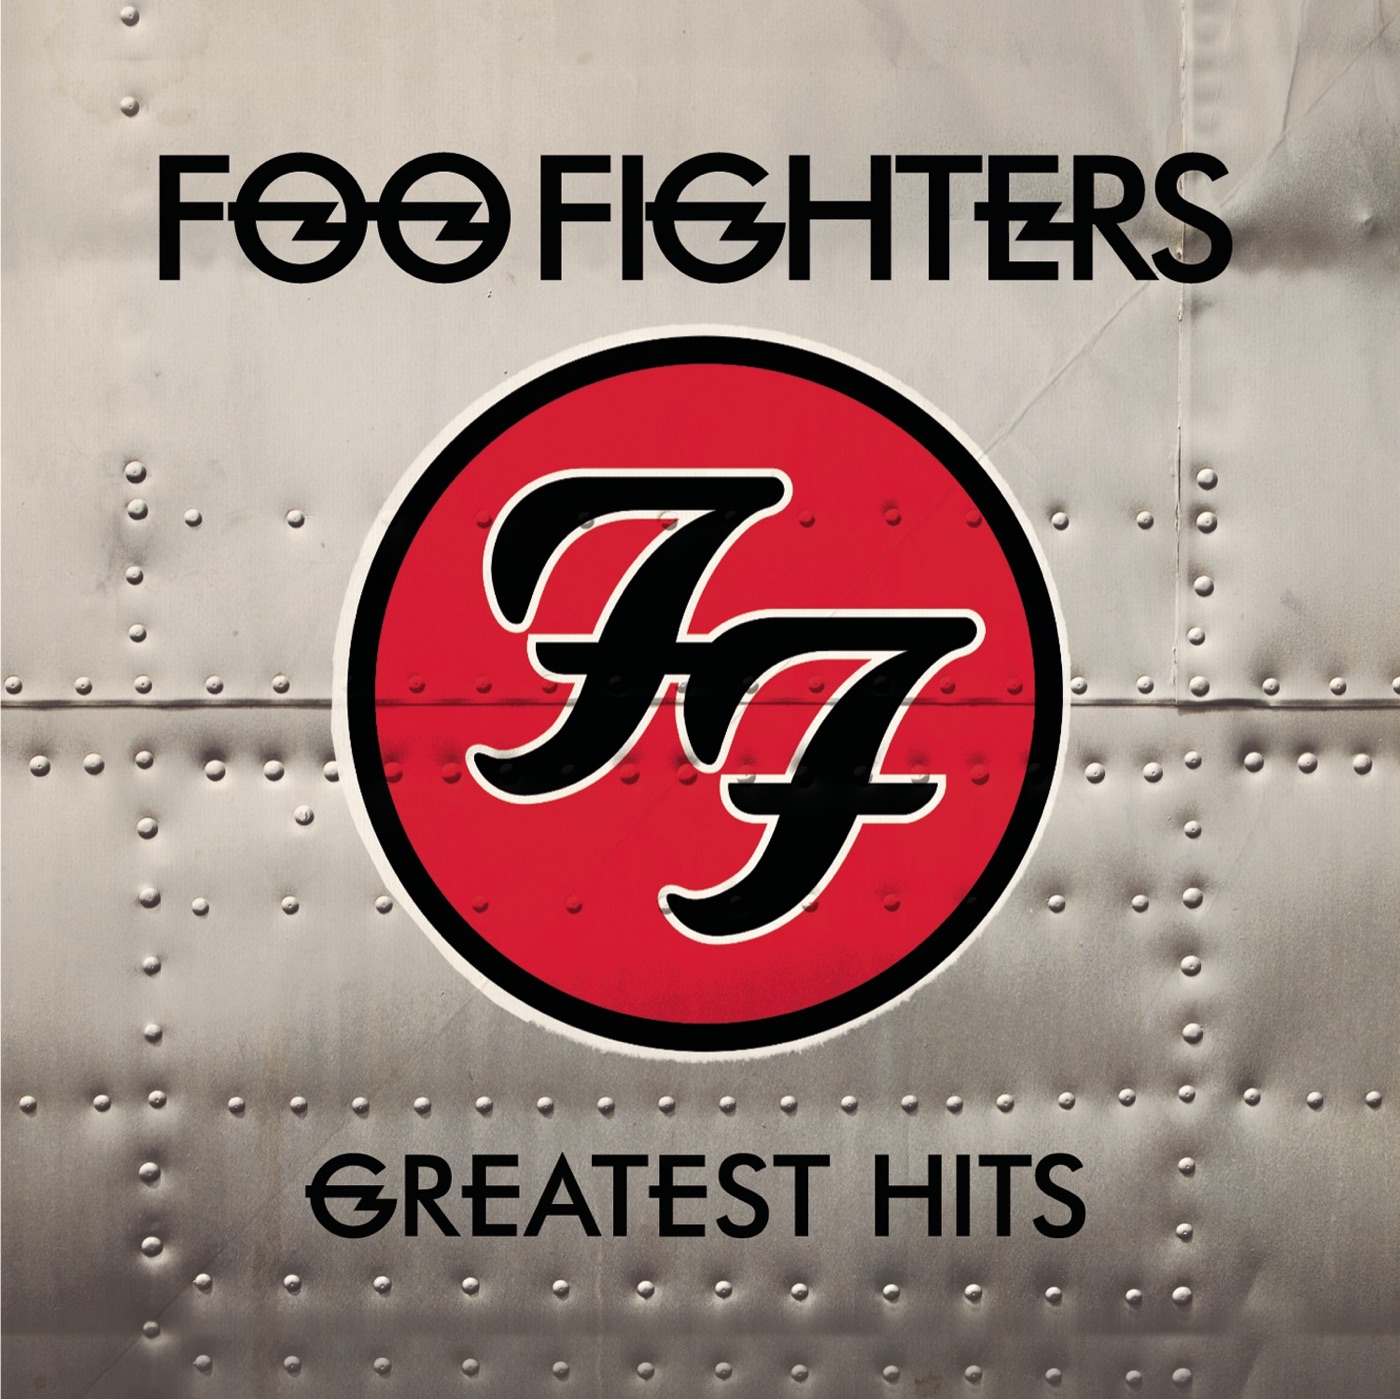 Greatest Hits by Foo Fighters